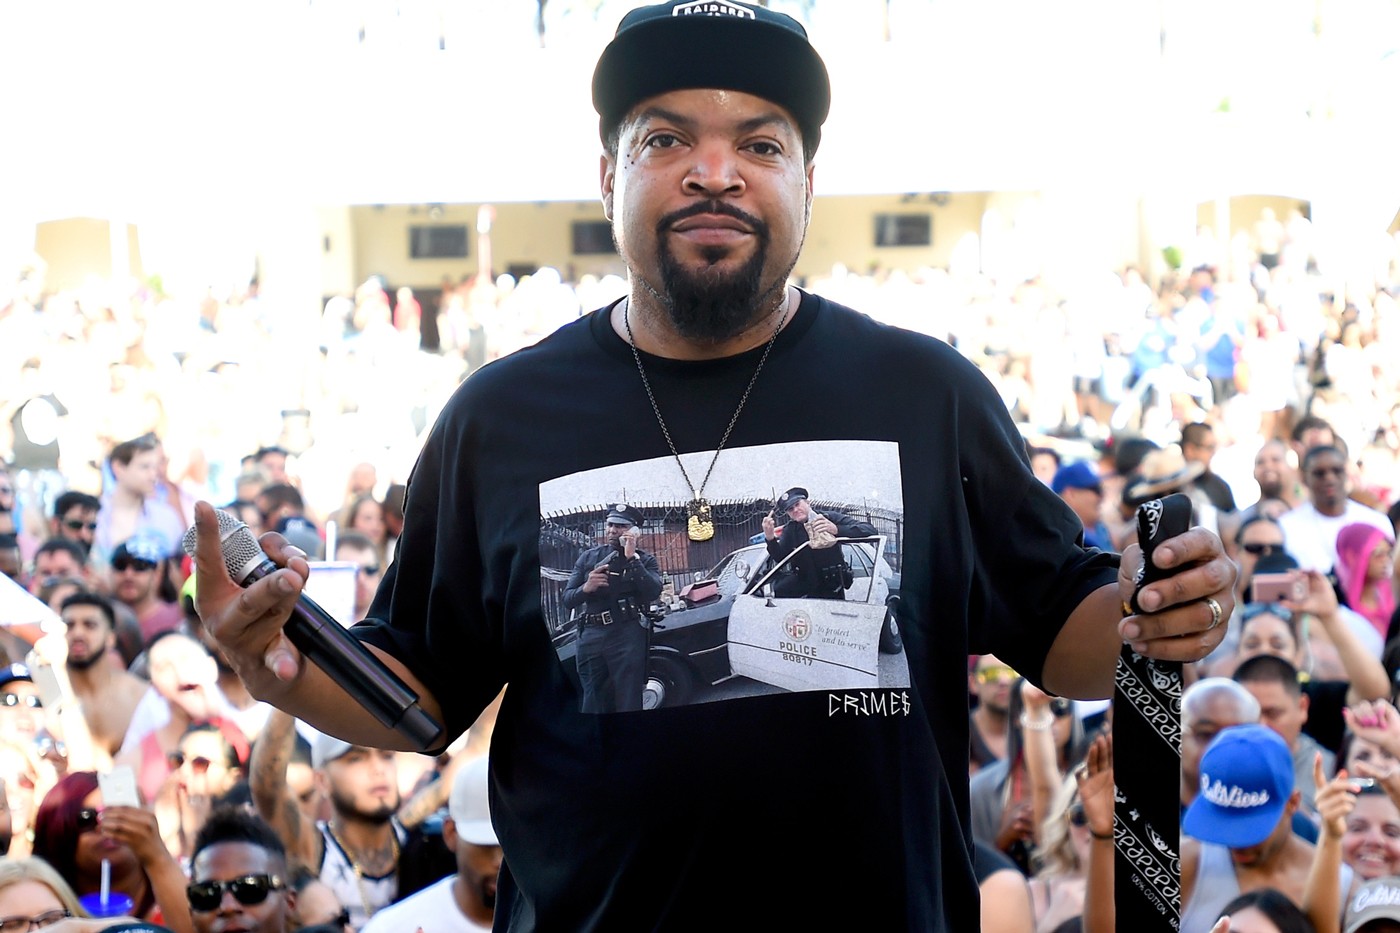 Ice Cube Claims He Nearly Killed a Classmate and Neighbor Over $20